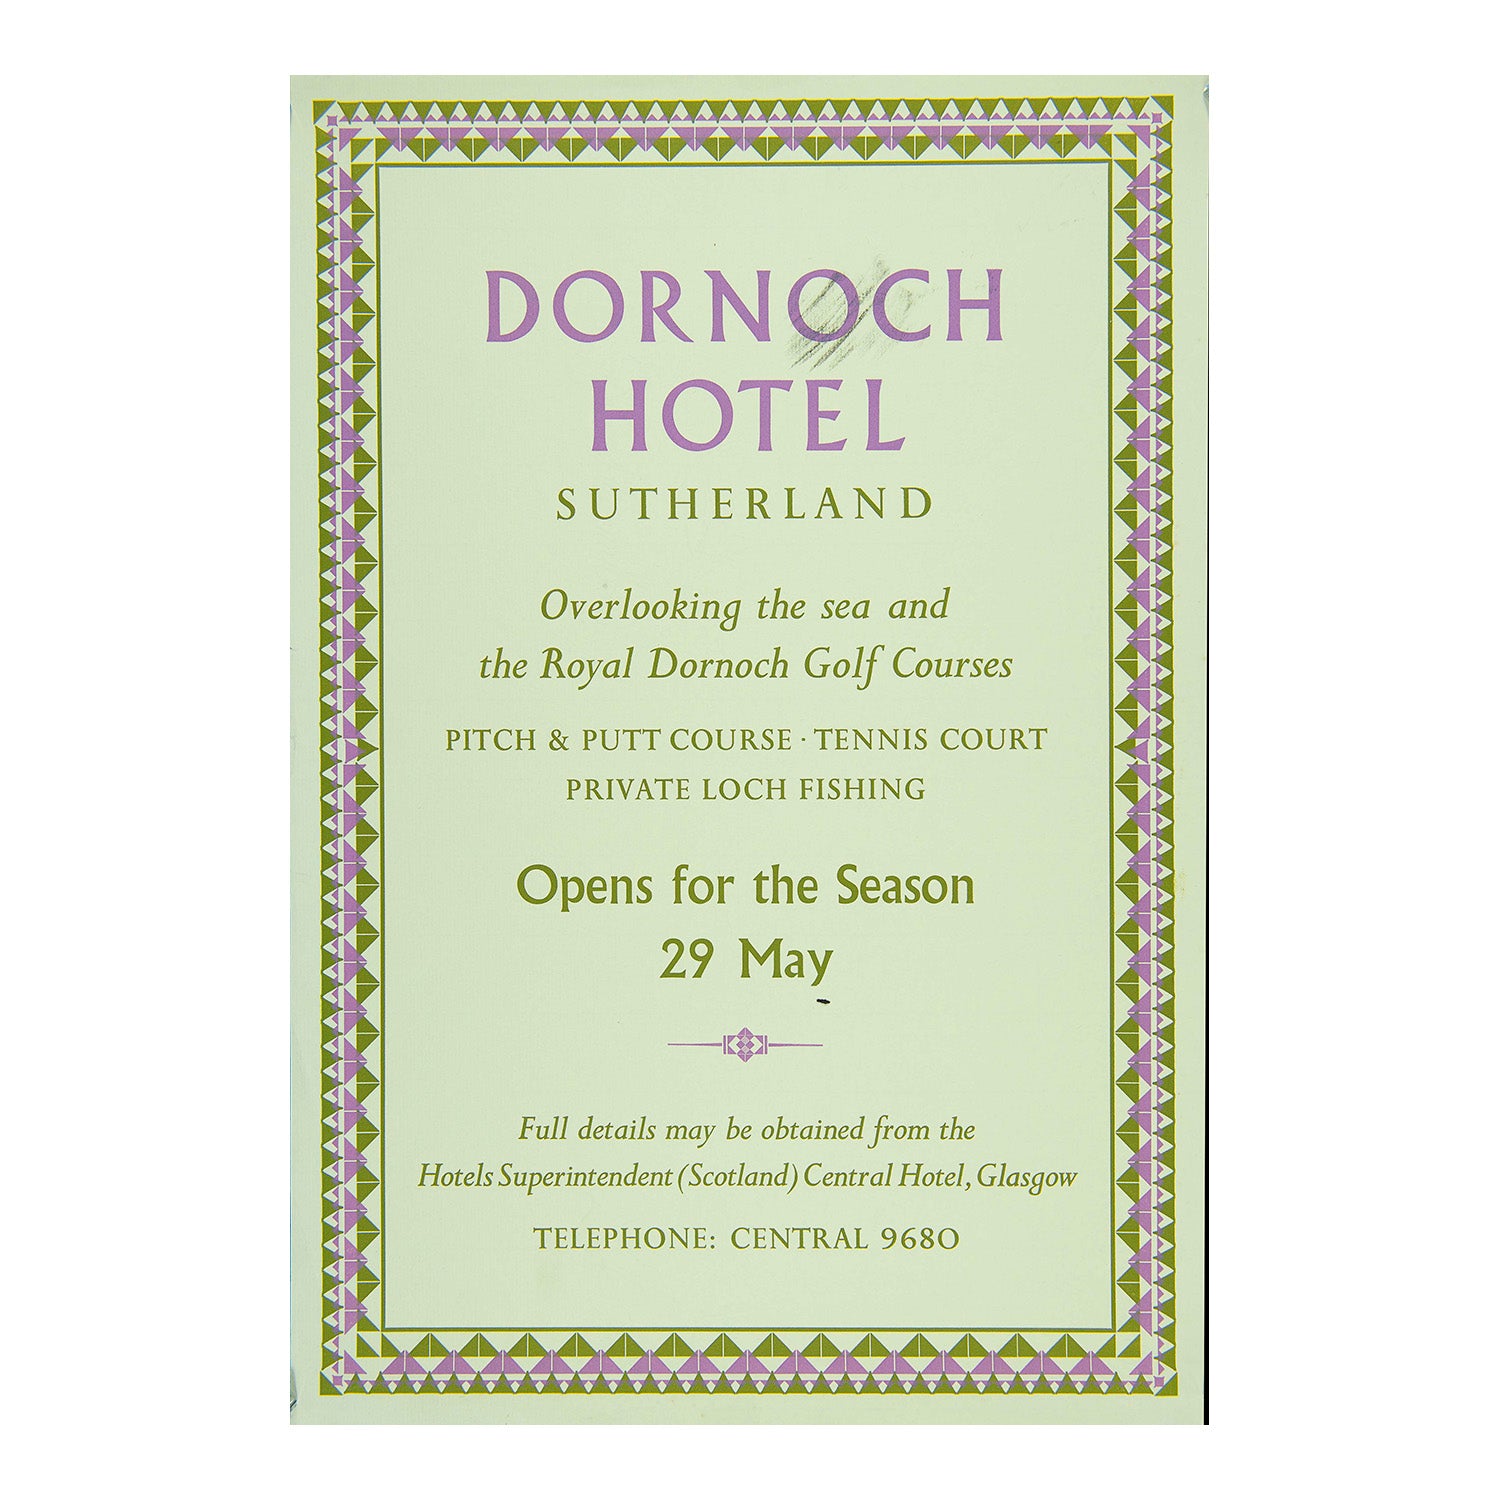 poster for the famous Dornoch Hotel, Sutherland, c. 1962. The poster, with decorative border designed in-house at the Curwen Press, promotes the start of the new golfing season and the hotel “Overlooking the sea and the Royal Dornoch Golf Courses”